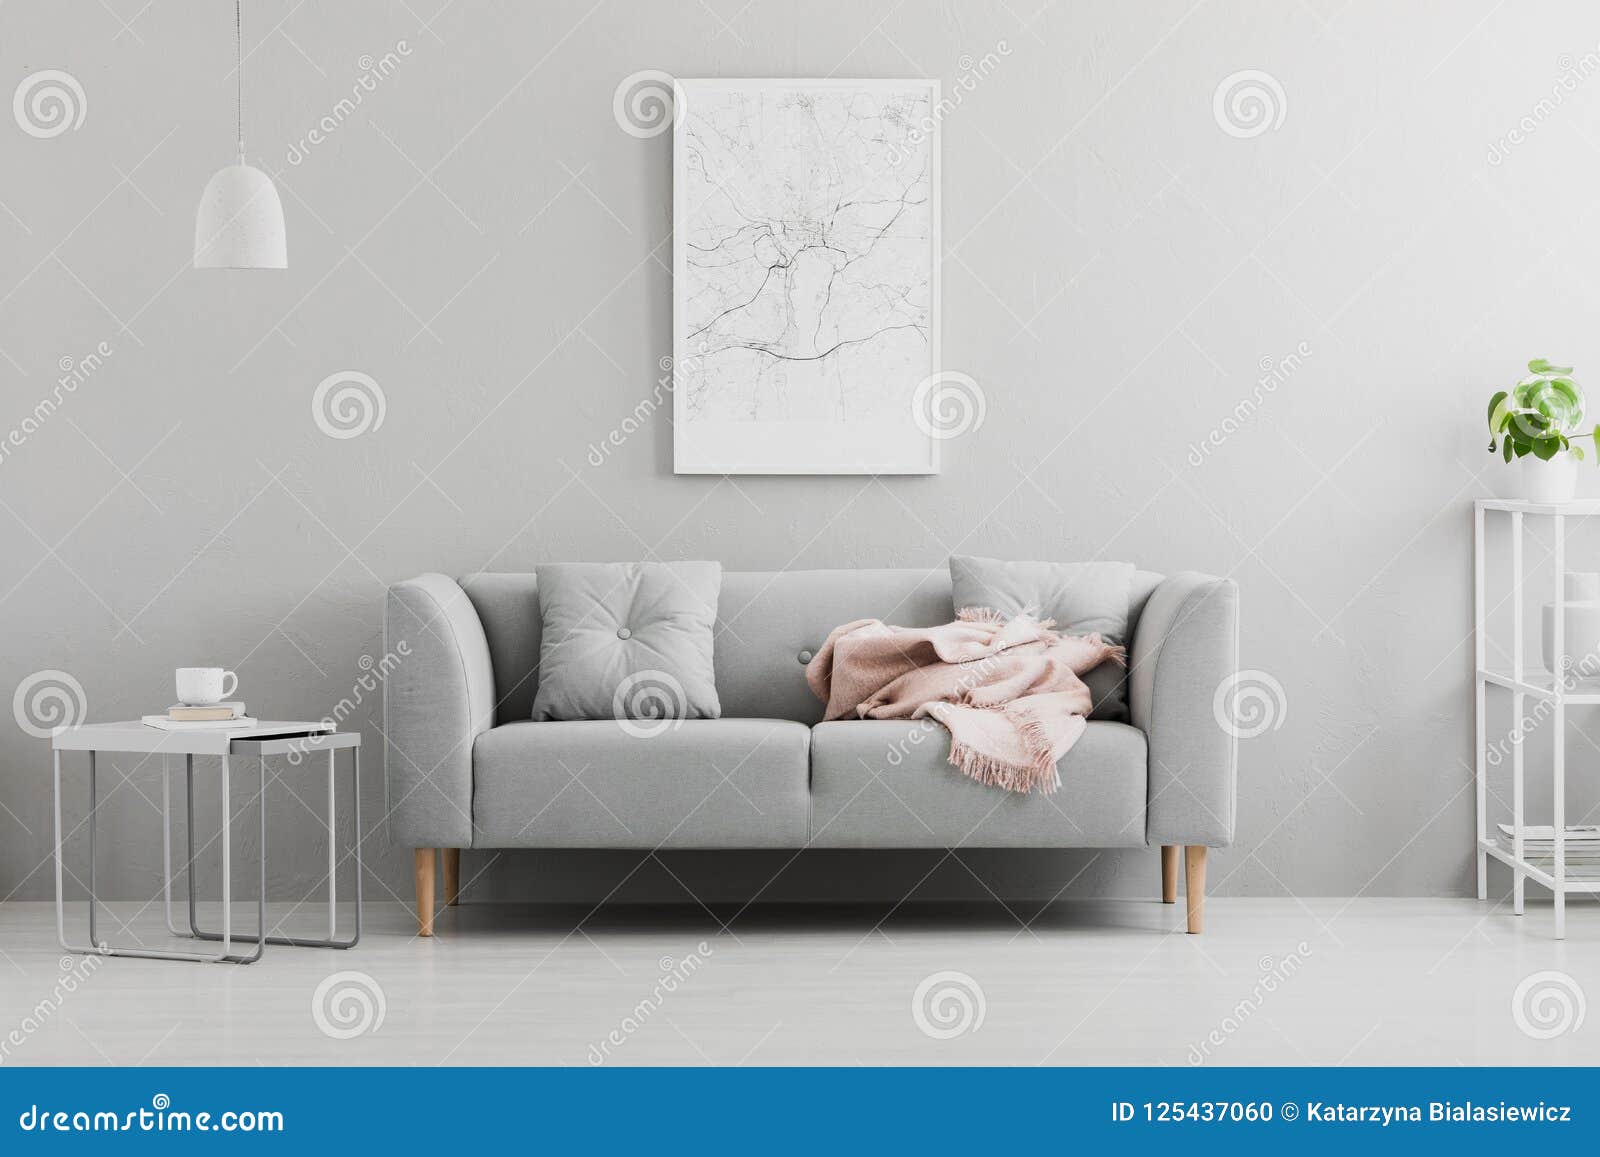 Poster Above Grey Sofa With Pink Blanket In Living Room 